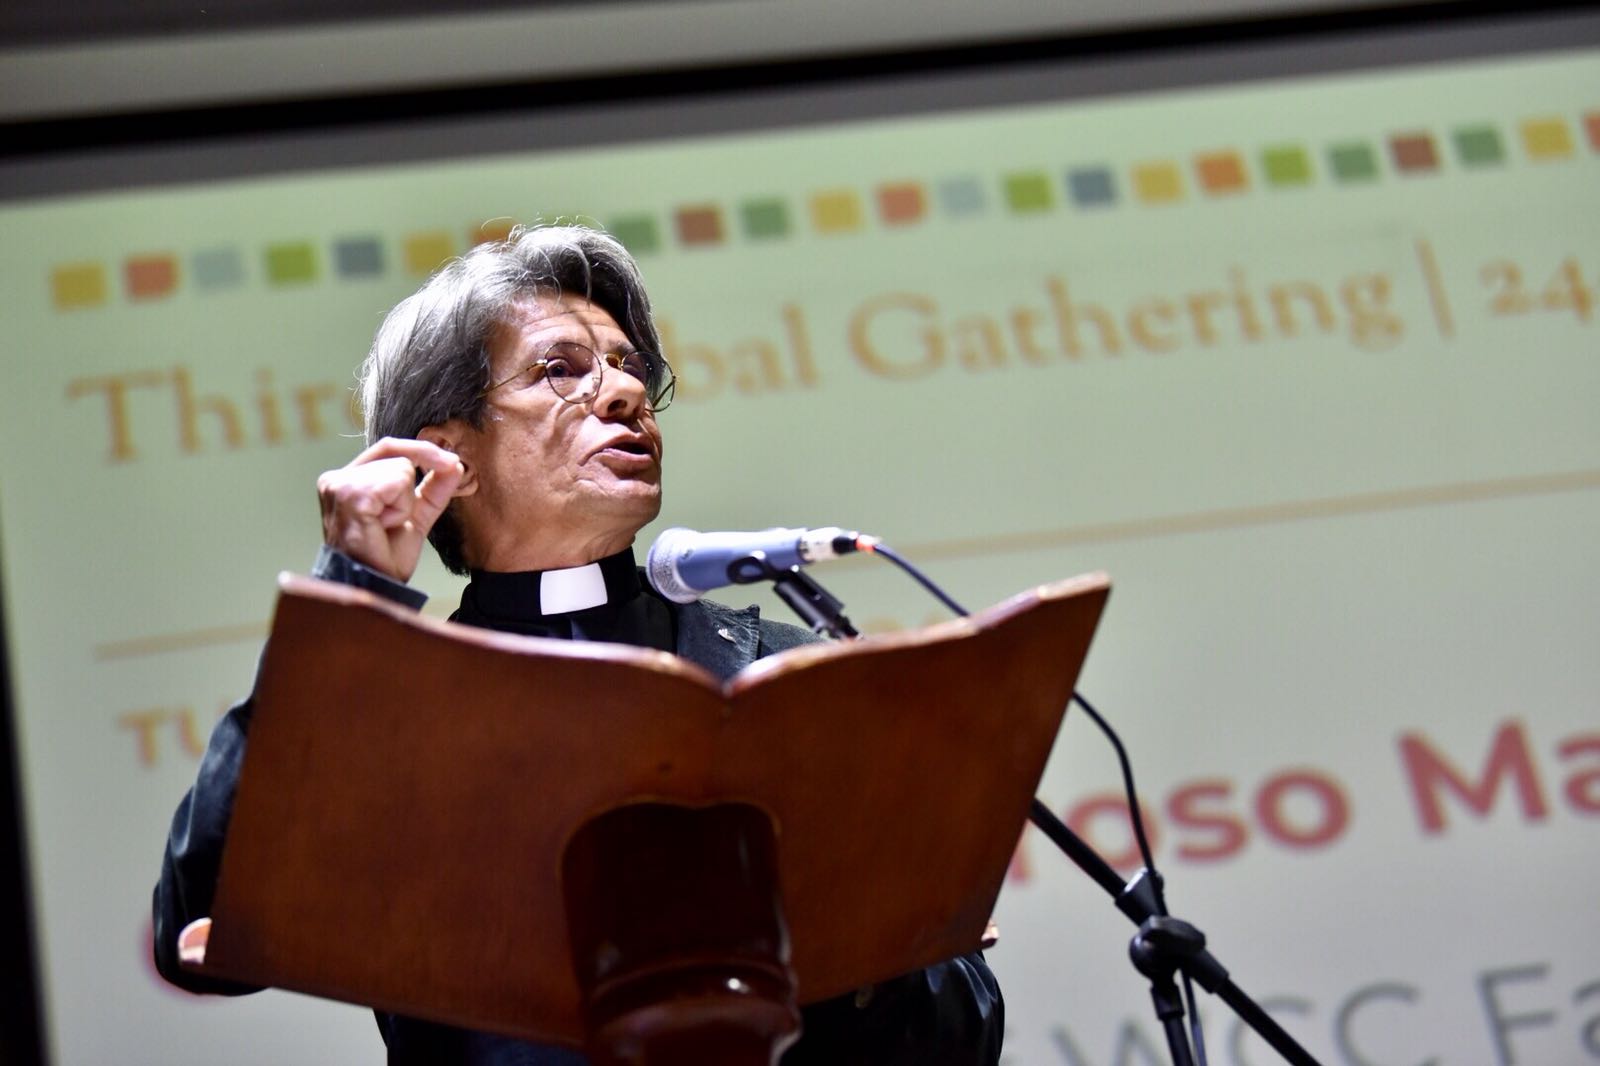 Global Christian Forum builds trust between Christian traditions says WCC general secretary